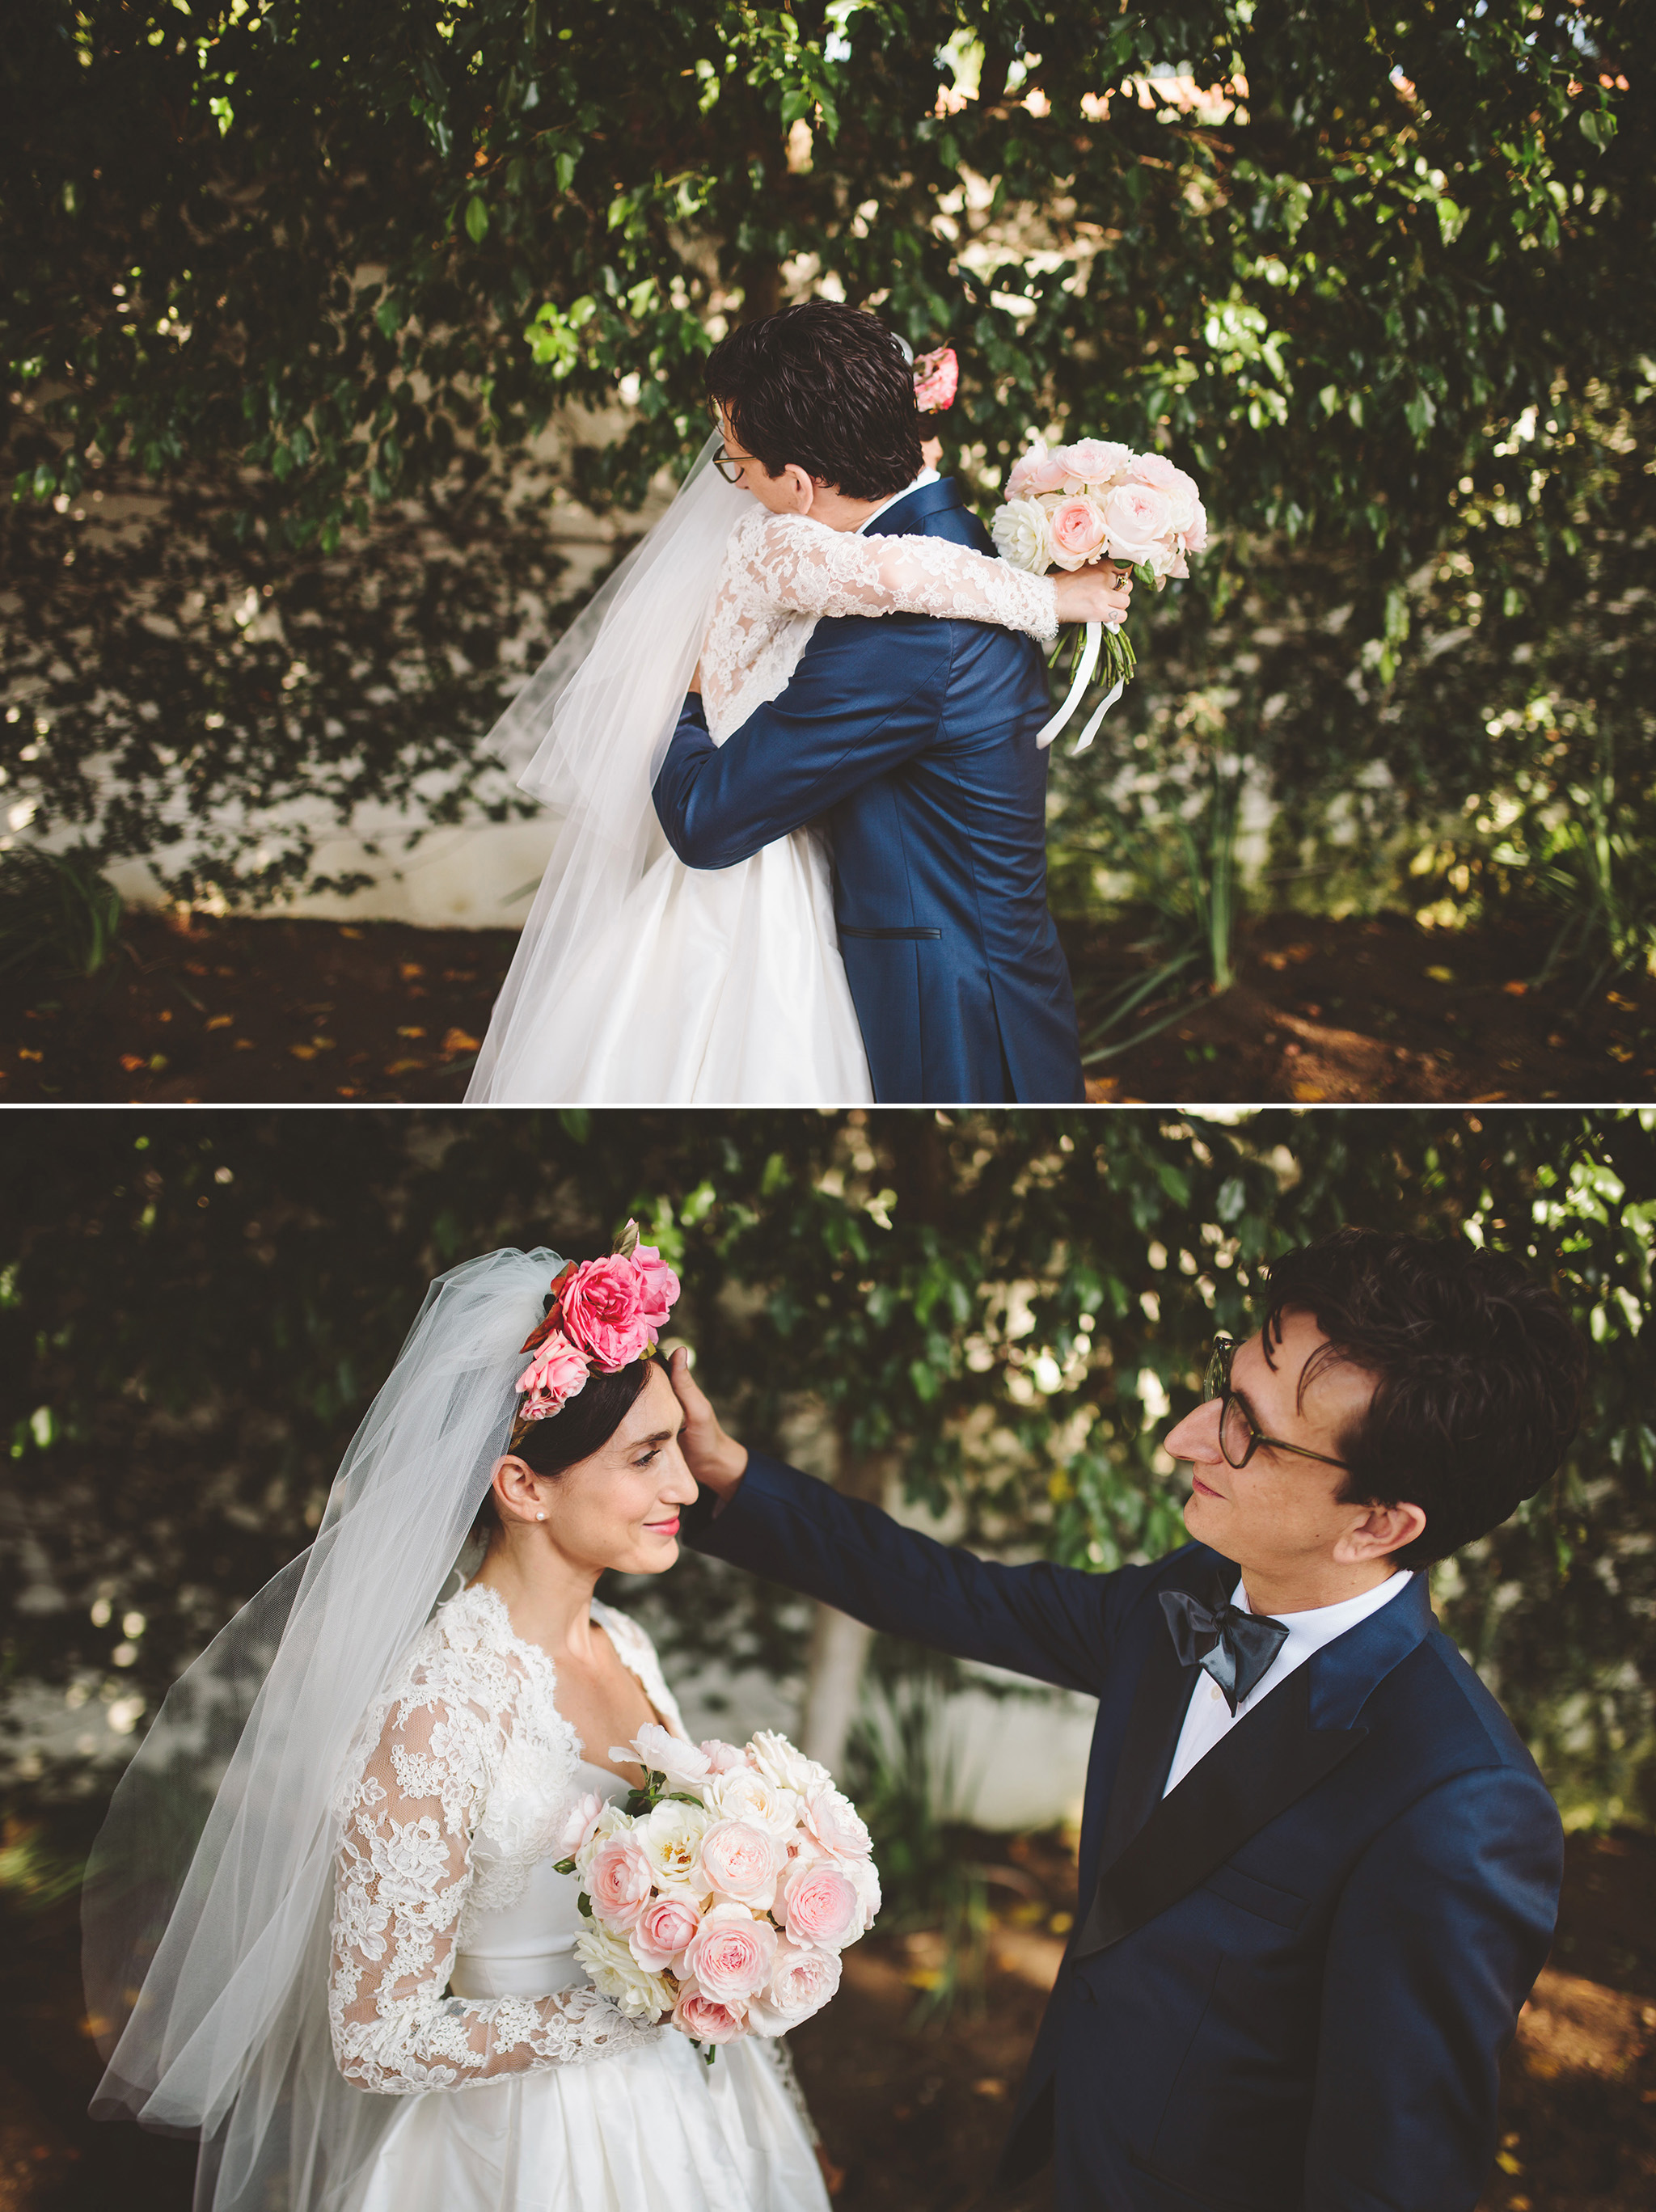 Lesley Arfin and Paul Rust wedding pictures 